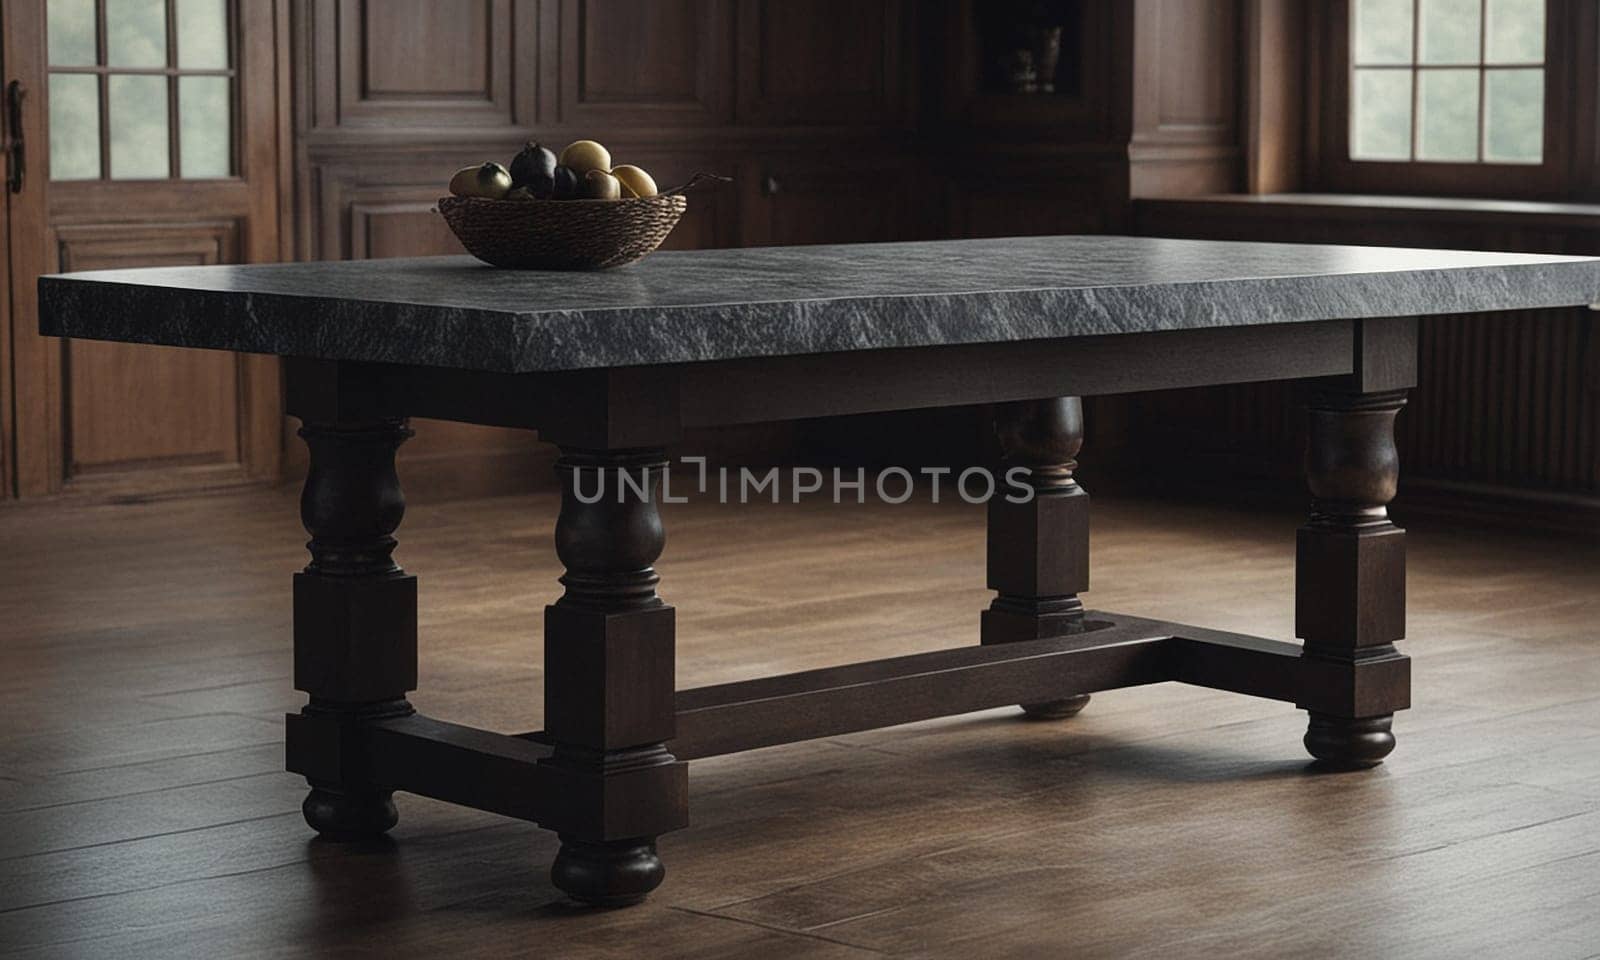 Professional design background with expensive black granite. Dark stone table by NeuroSky